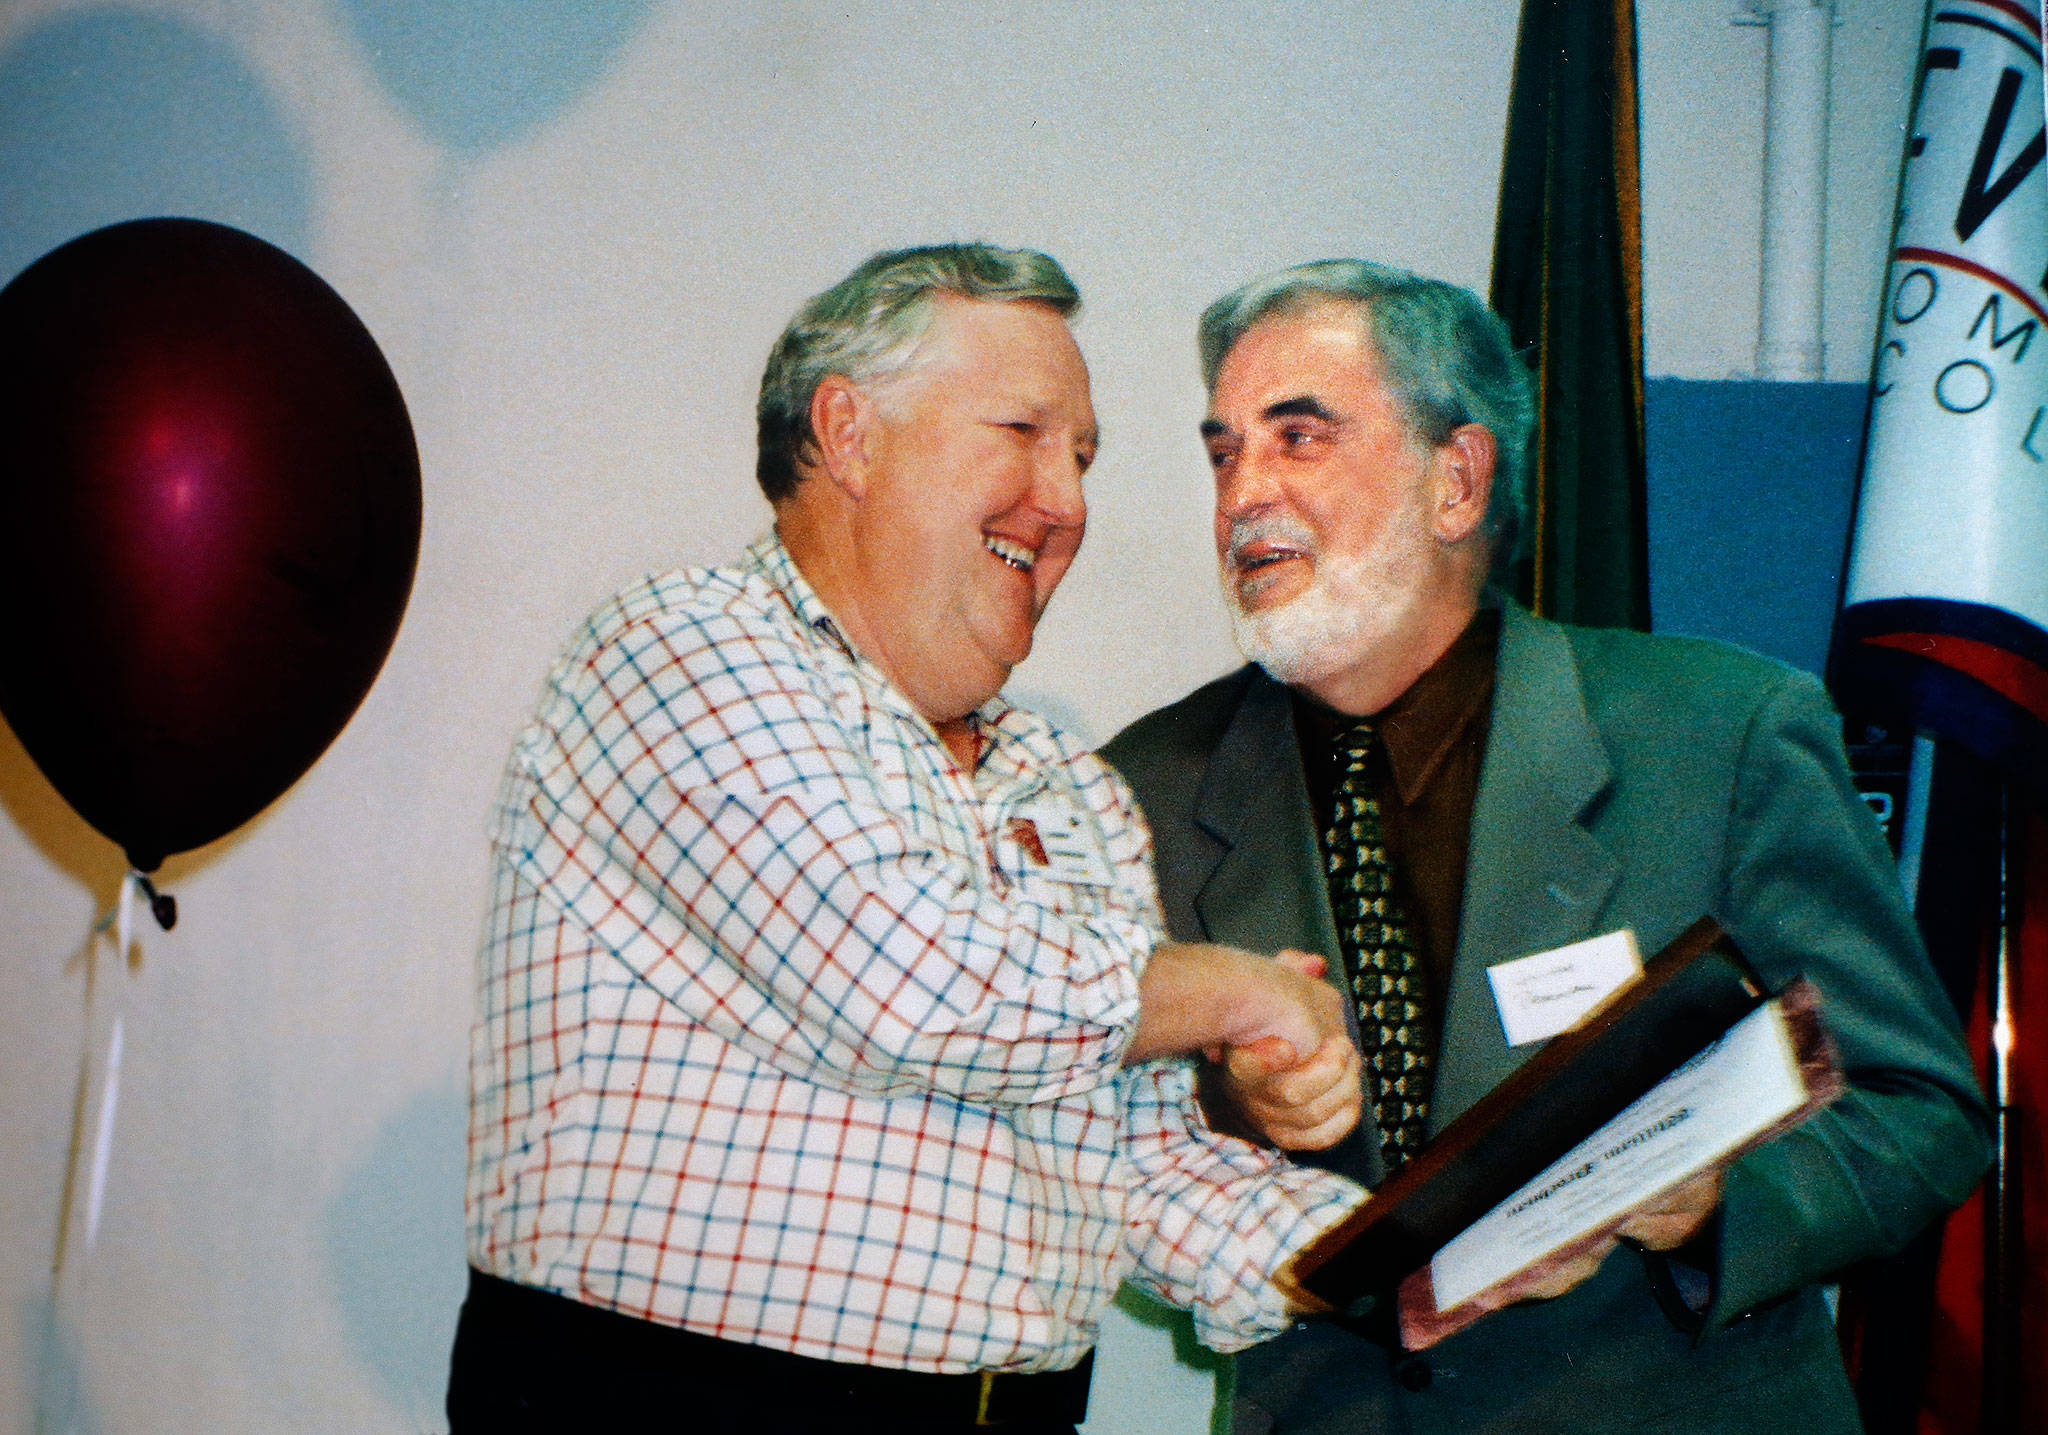 Bill Prochnau (right) received an Everett Junior College Distinguished Alumnus Award from then-Herald Publisher Larry Hanson at the college’s Grand Reunion in August 1997. Prochnau, a renowned journalist and author, died March 28 in Washington, D.C. (Photo courtesy Larry O’Donnell)